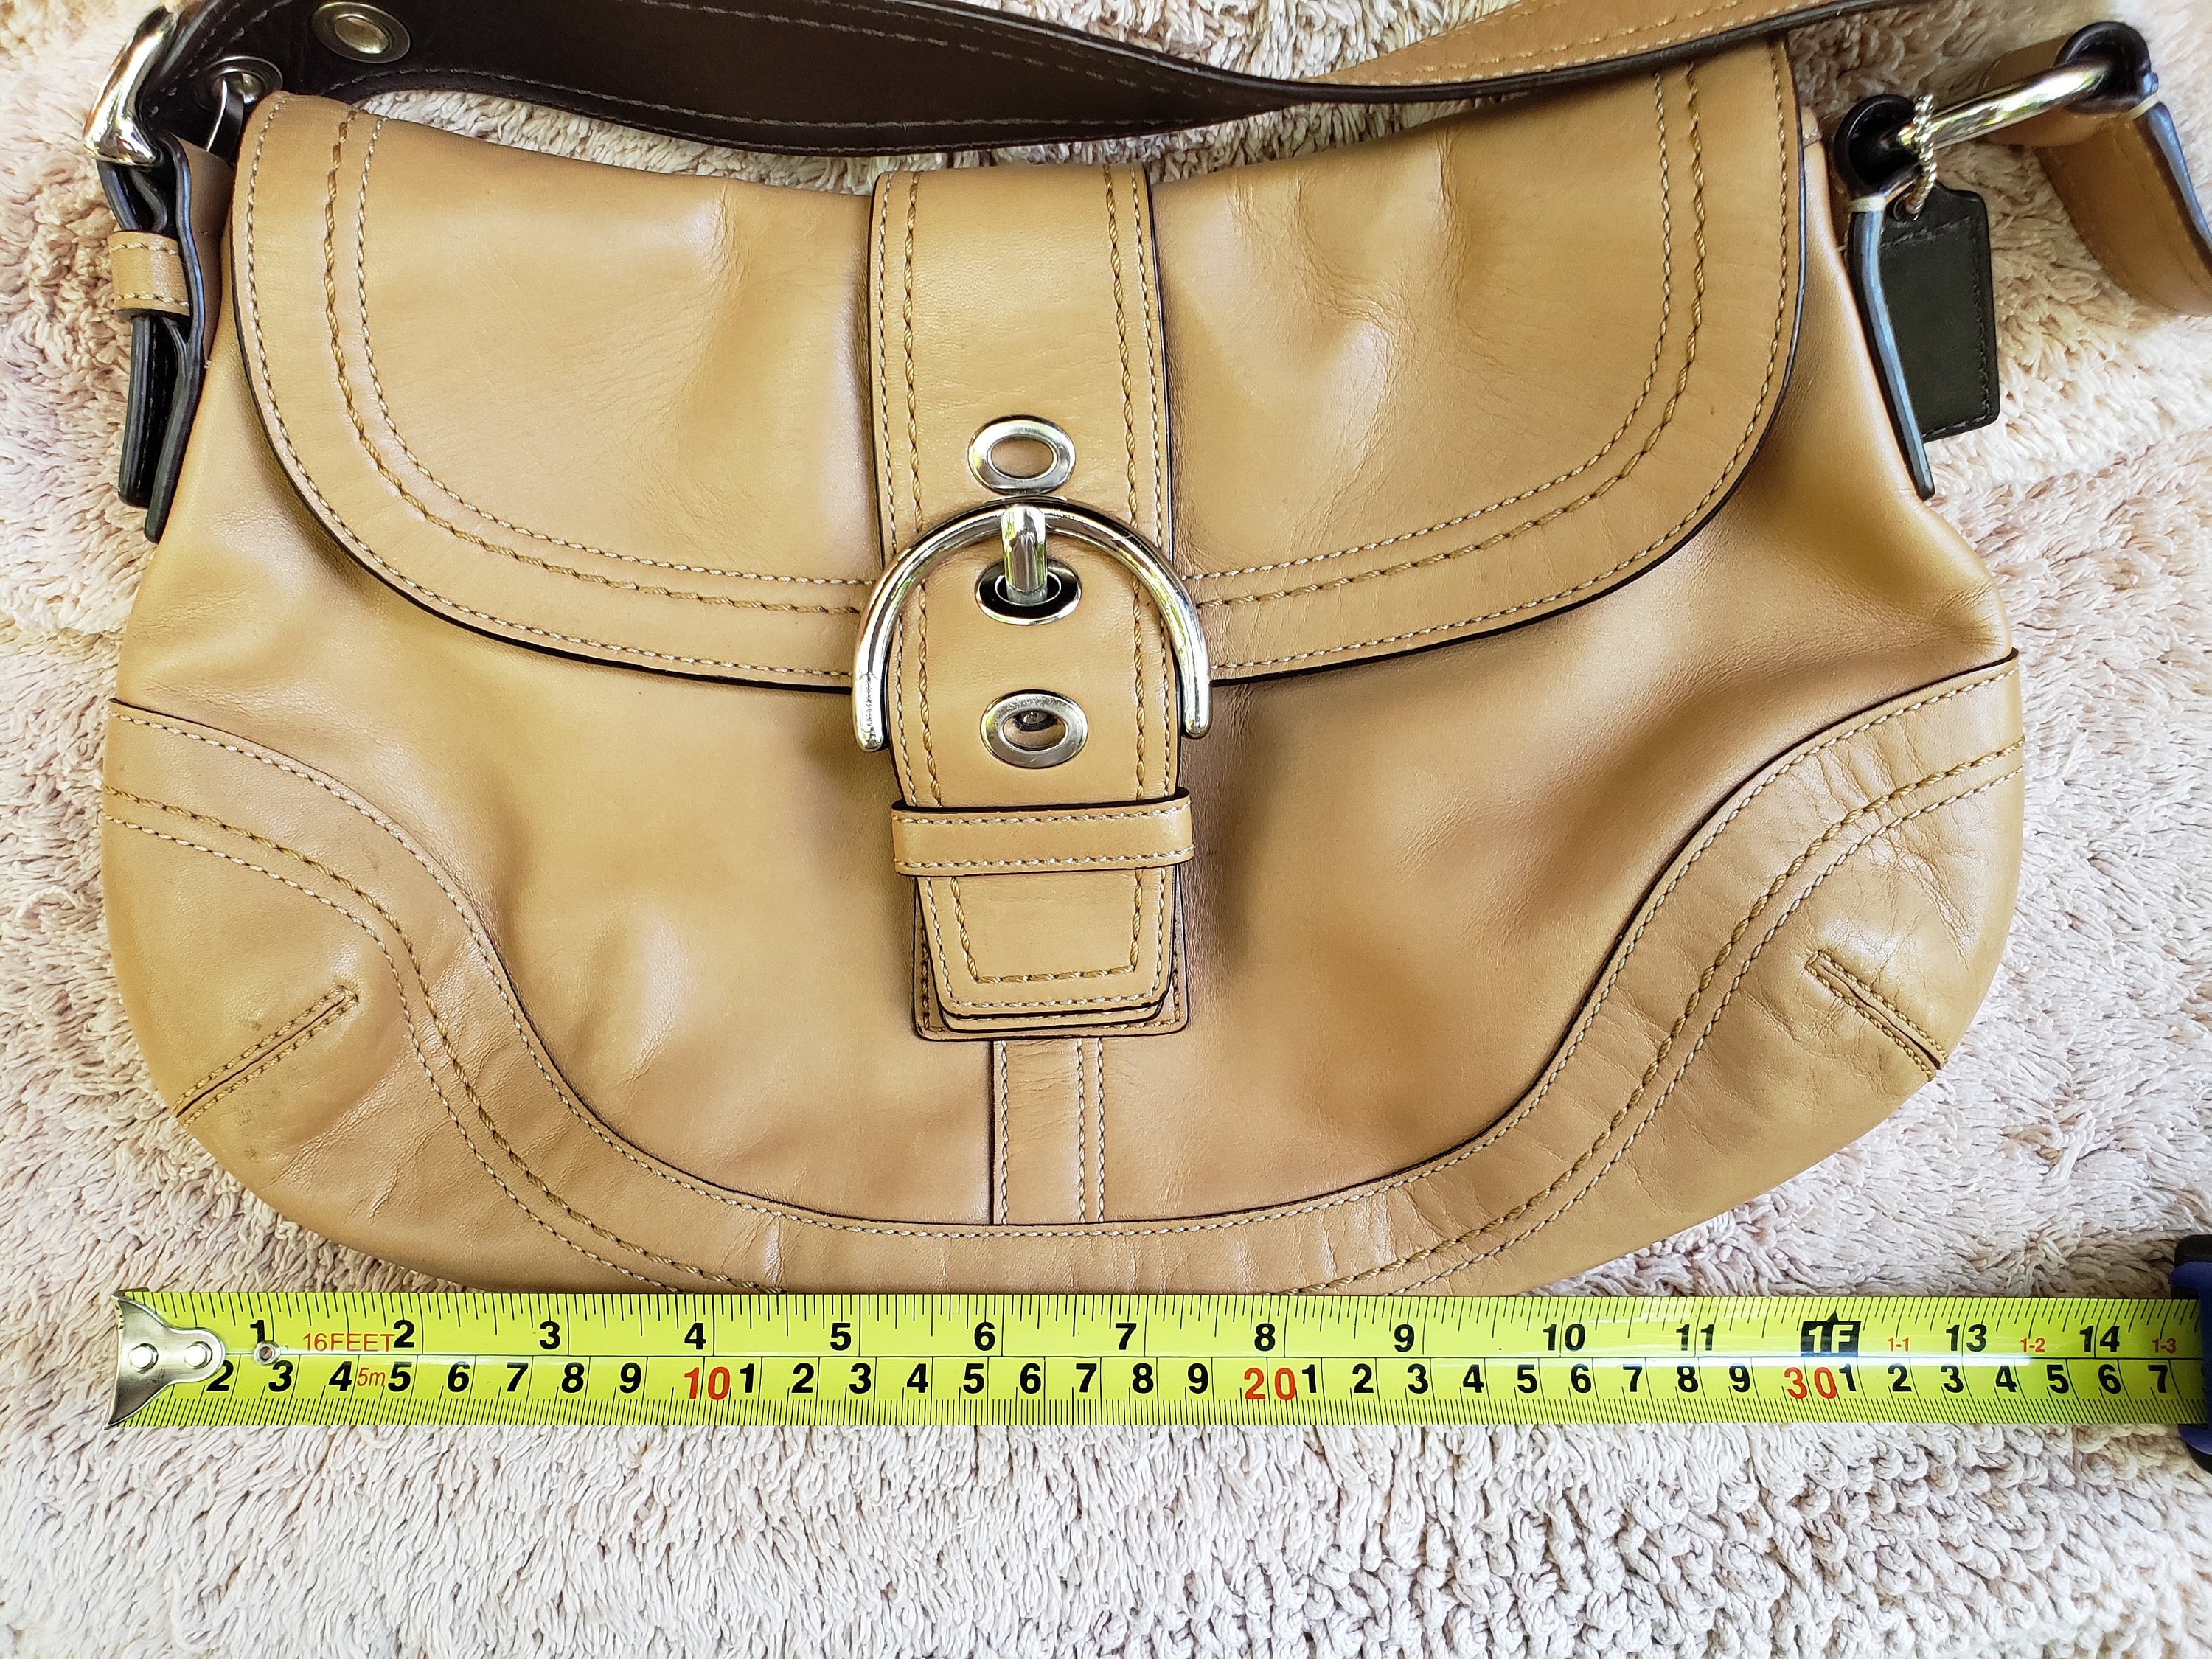 Vintage Coach Brown Leather Hobo Bag Purse 9342 by qtvintages